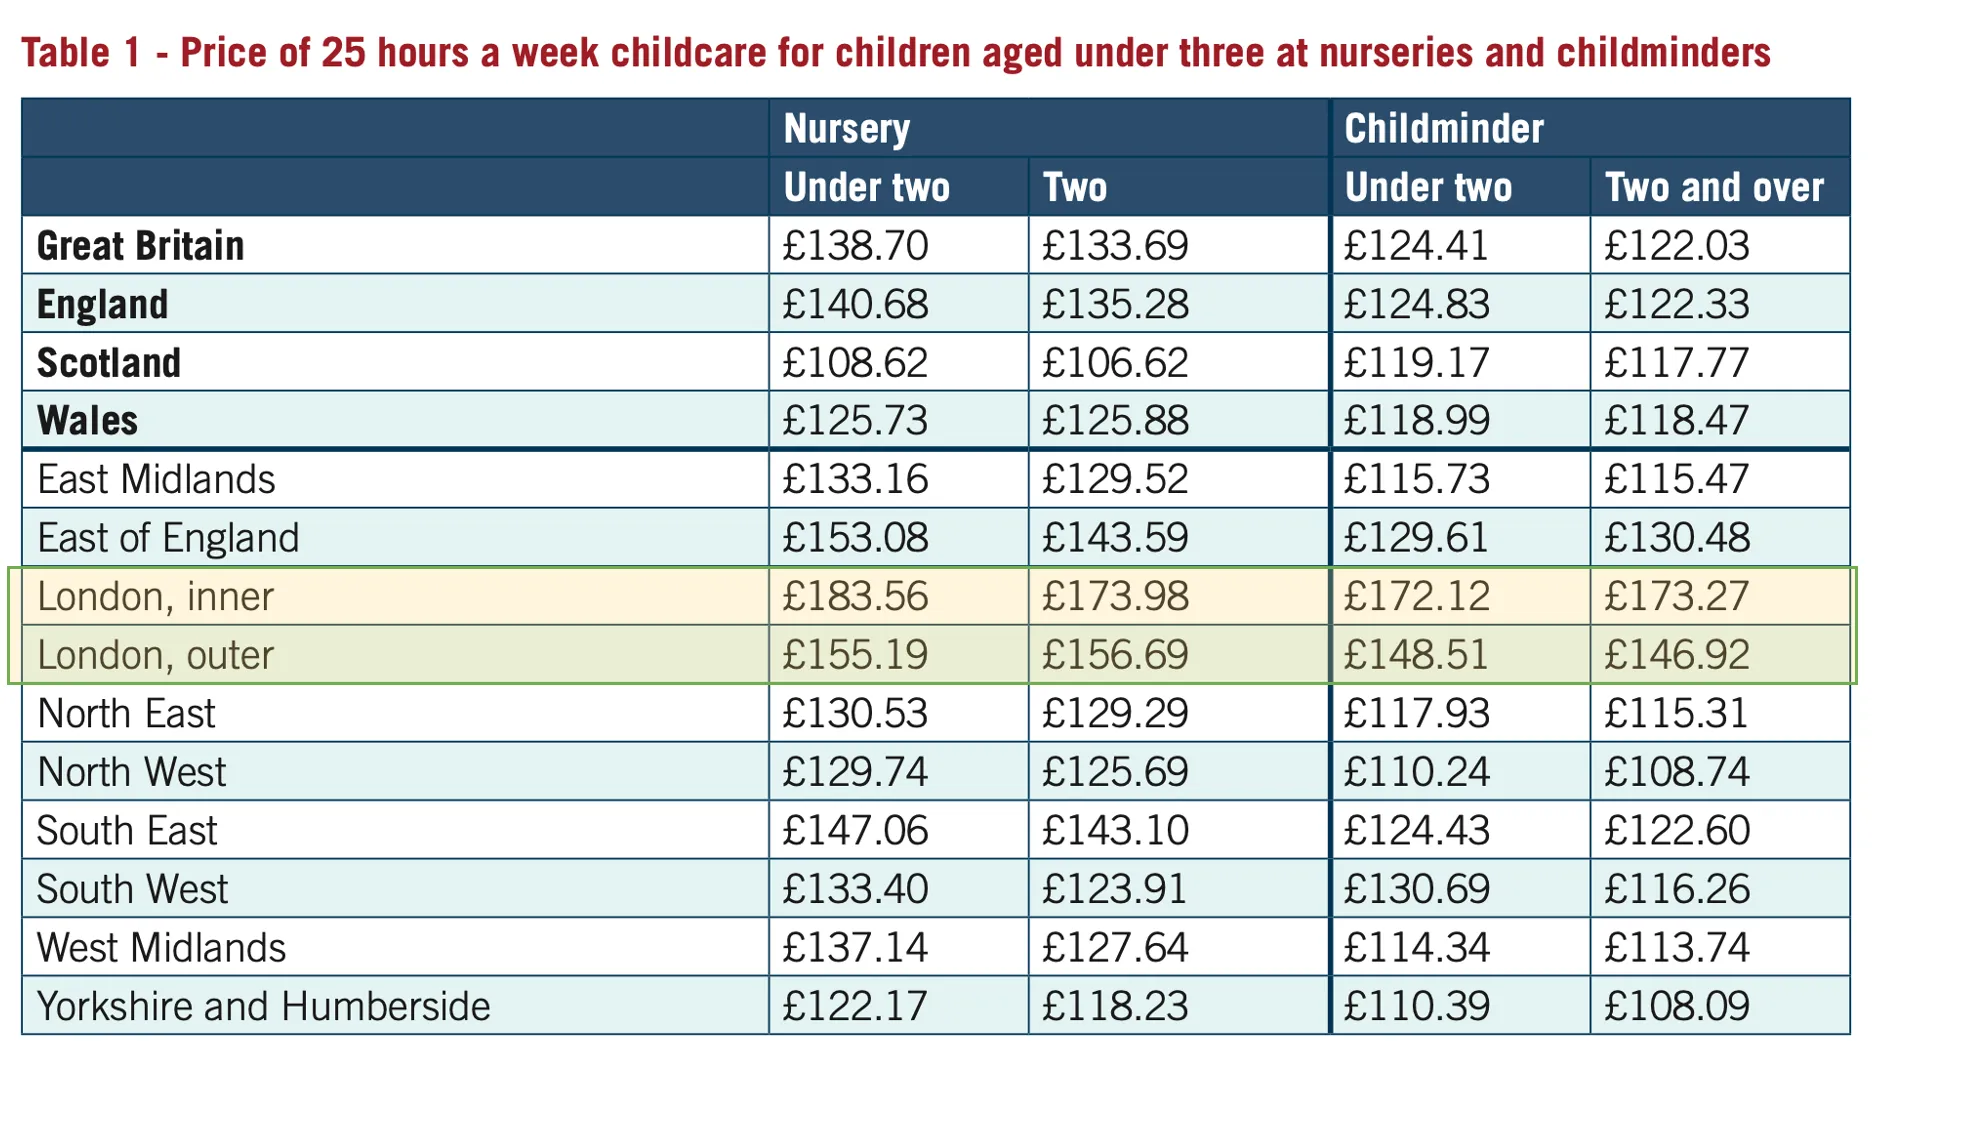 Source: Childcare Survey 2022, Coram Family and Childcare